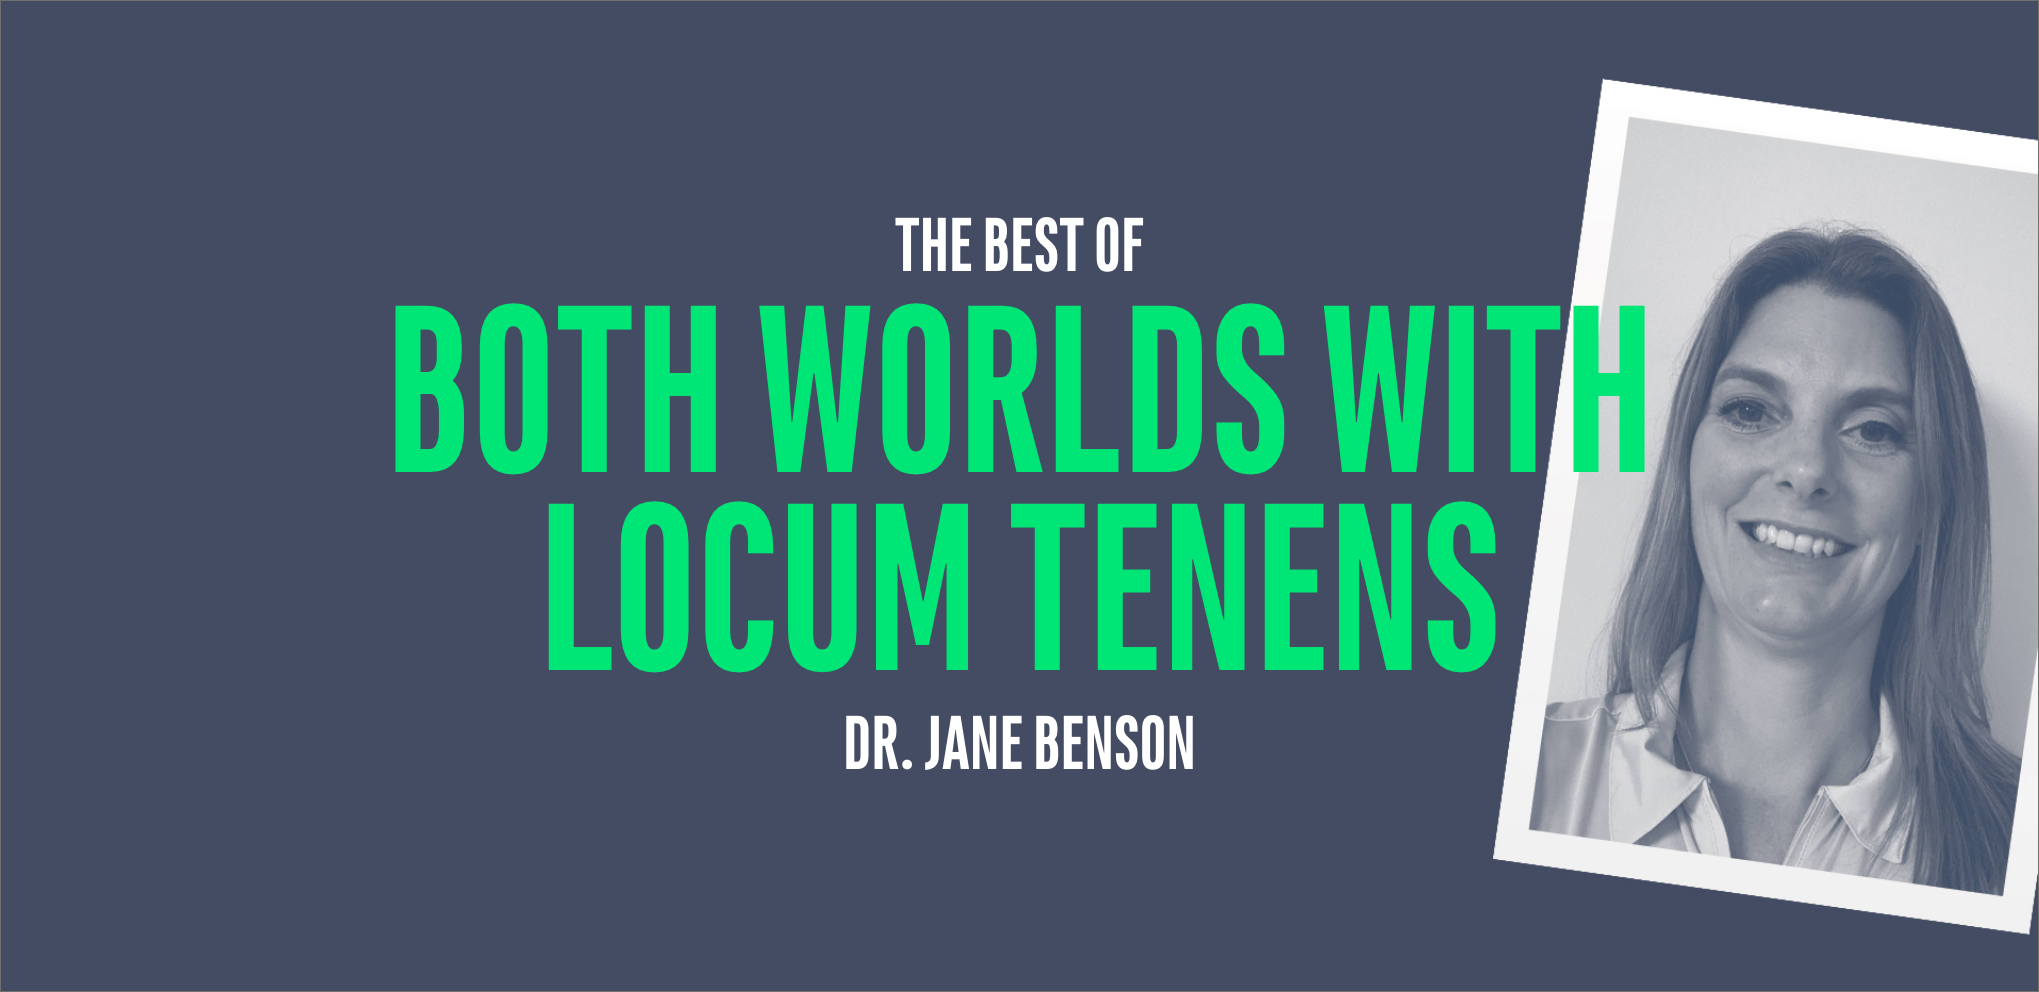 The Best of Both Worlds with Locum Tenens